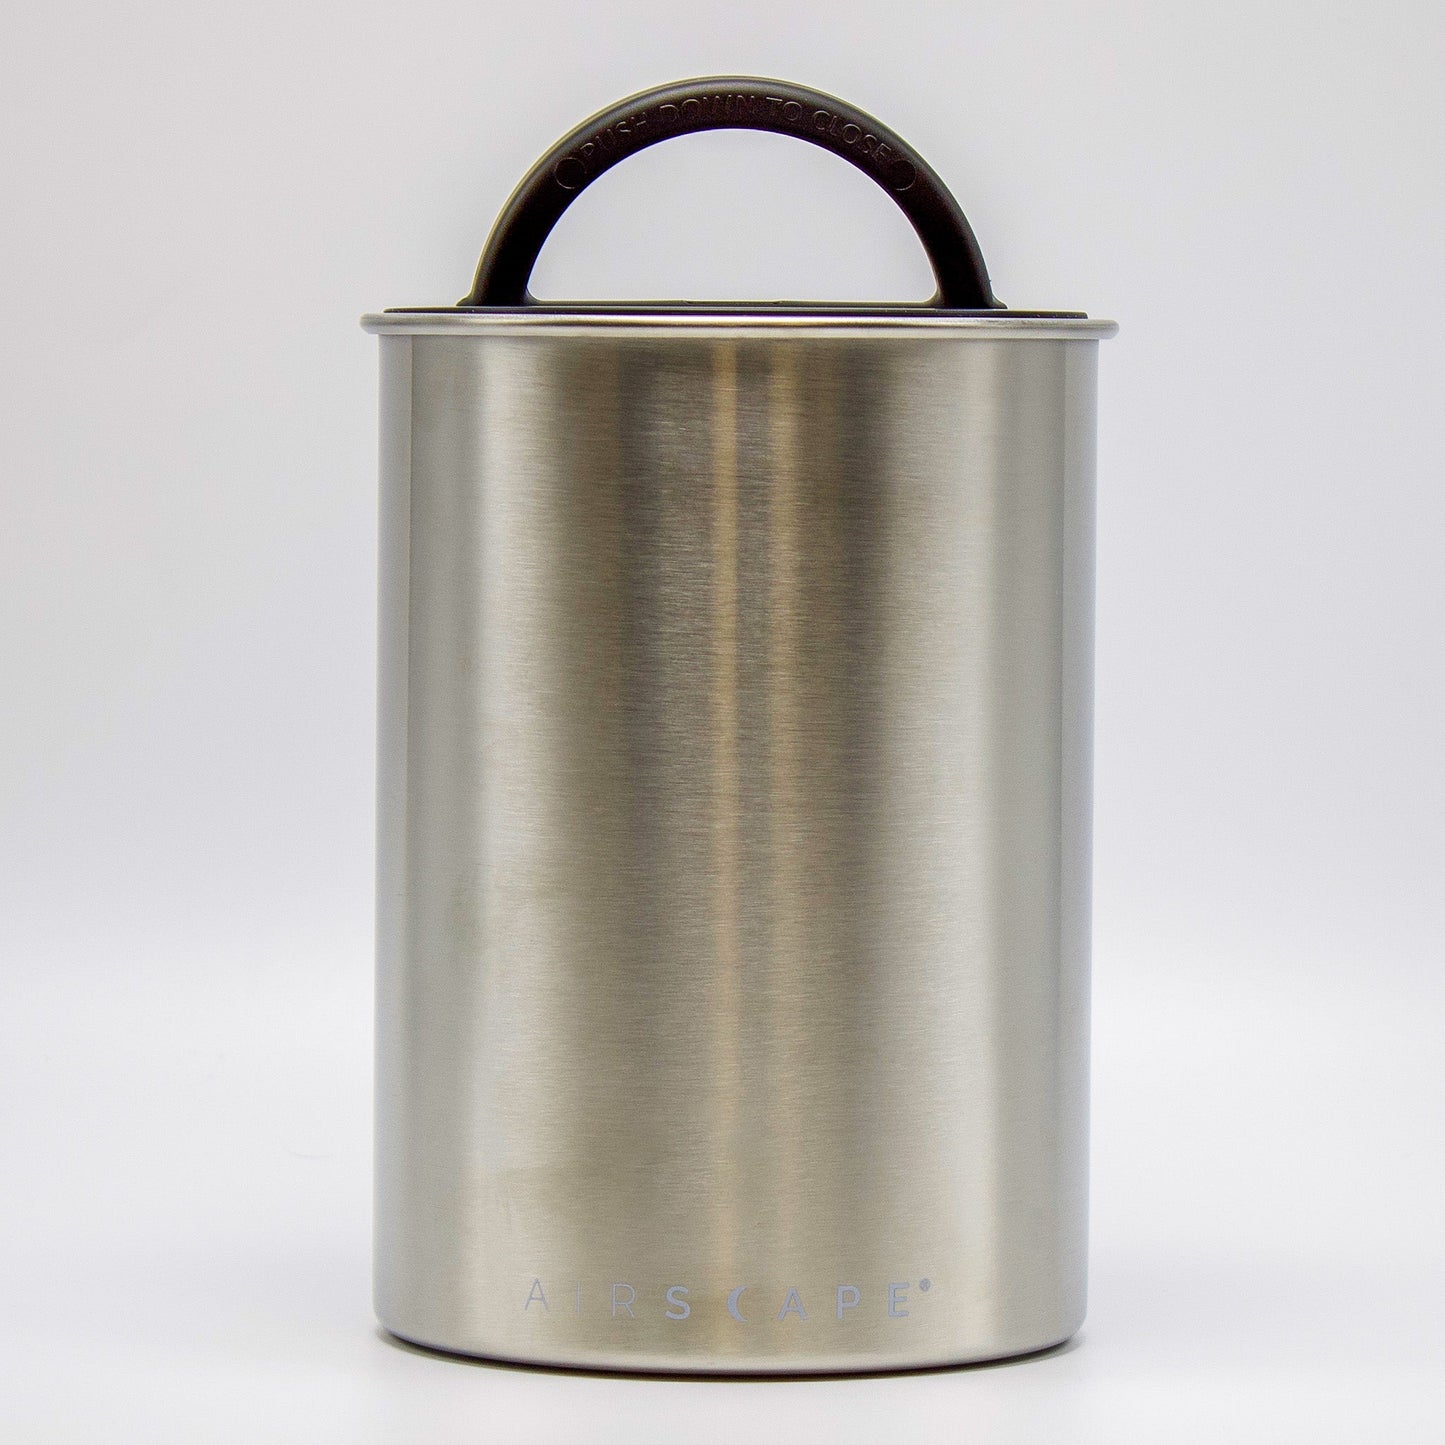 WRC Branded Airscape Canister (Brushed Steel) - White Rock Coffee